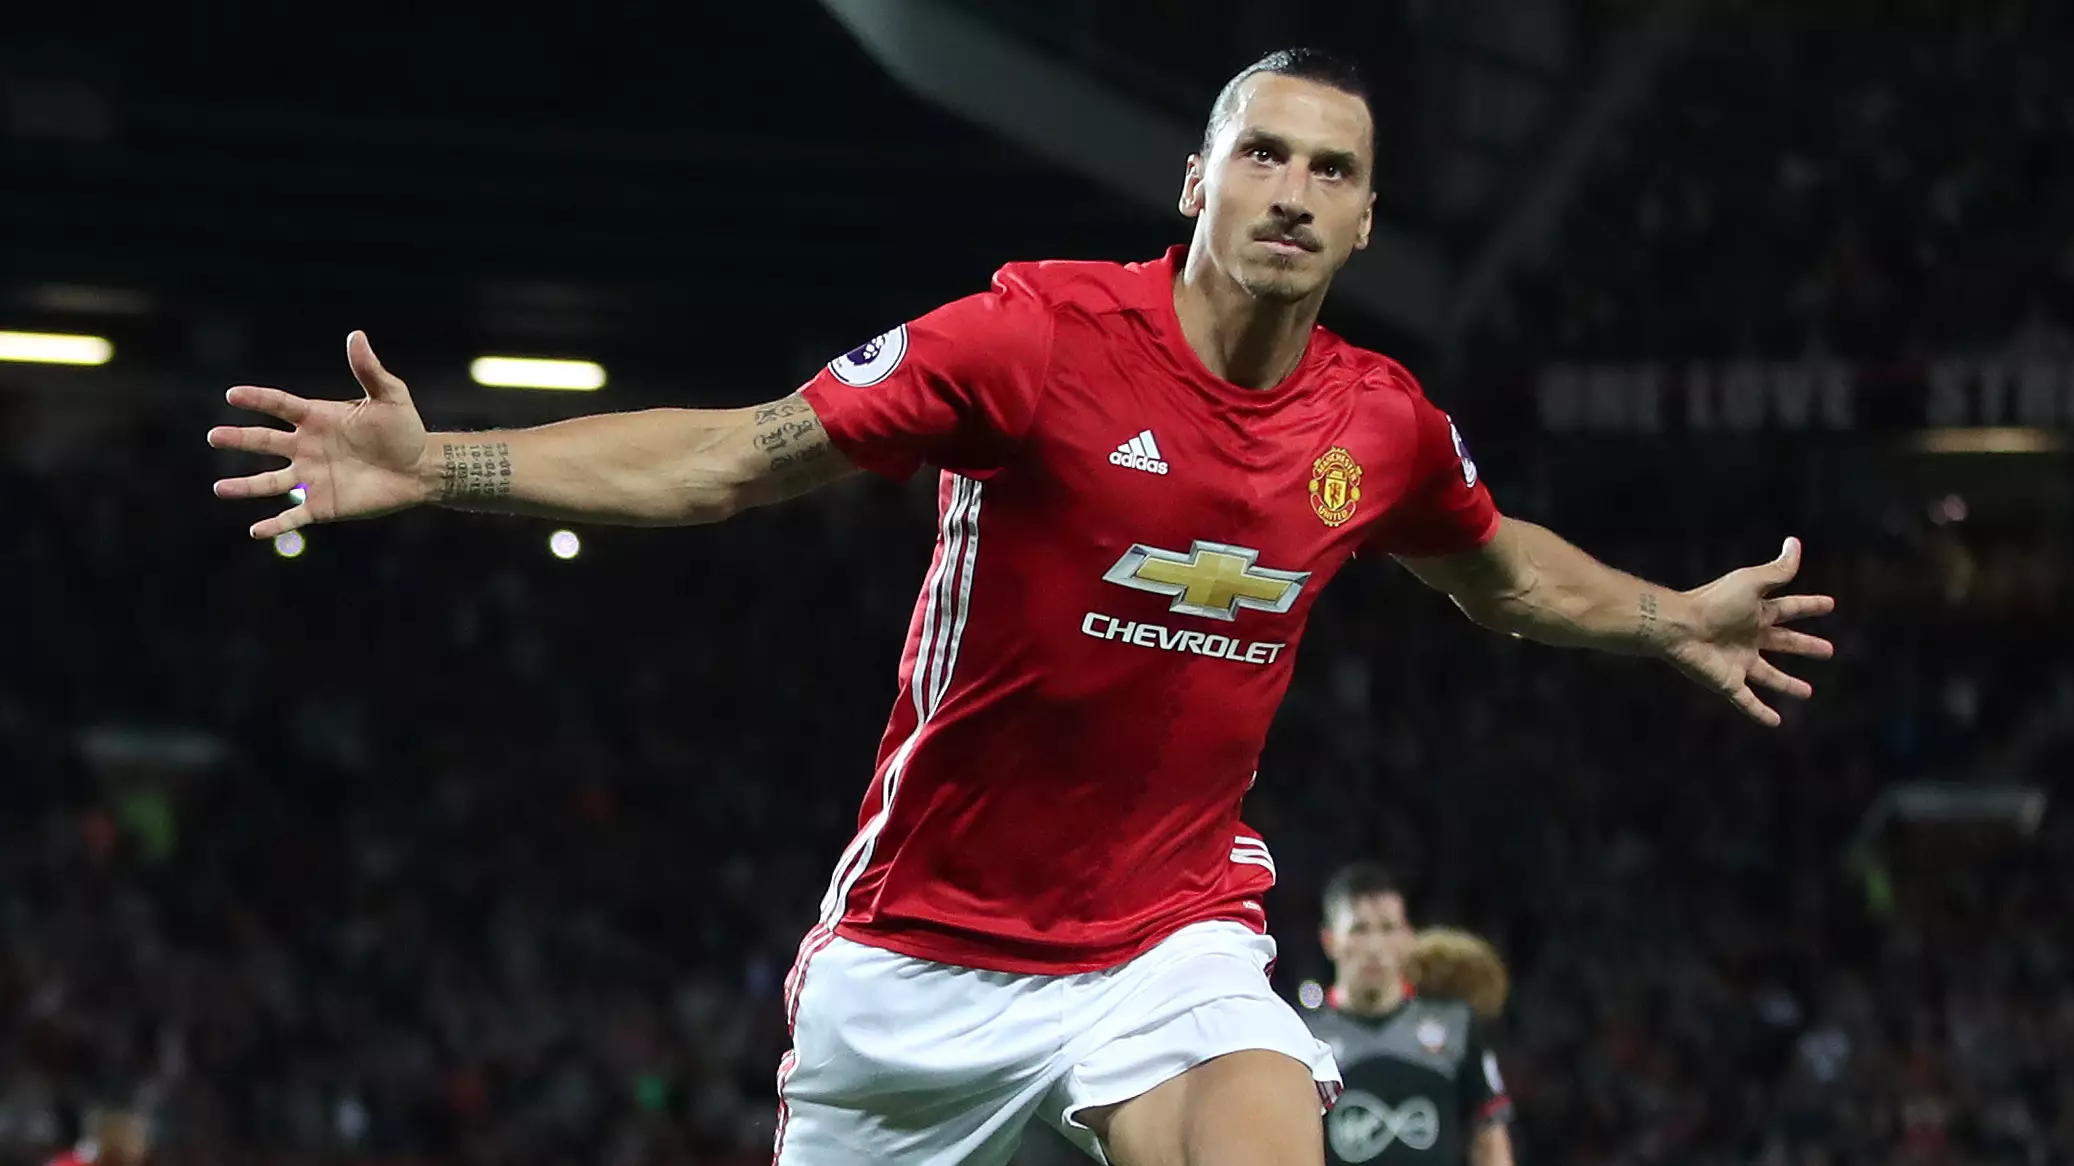 Zlatan scored 28 goals in all competitions last season. Image: PA Images